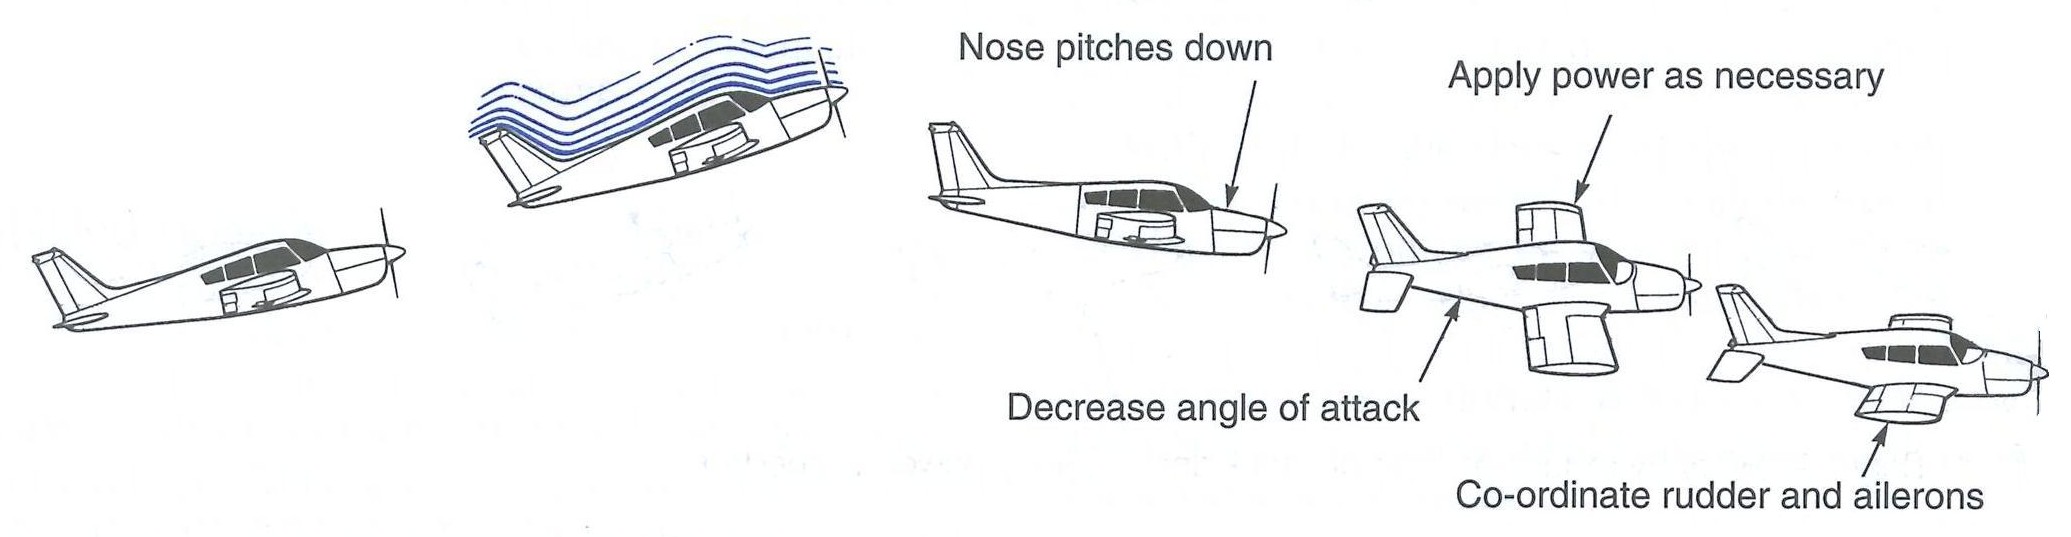 Full Stall Recovery from the Canadian Flight Training Manual.